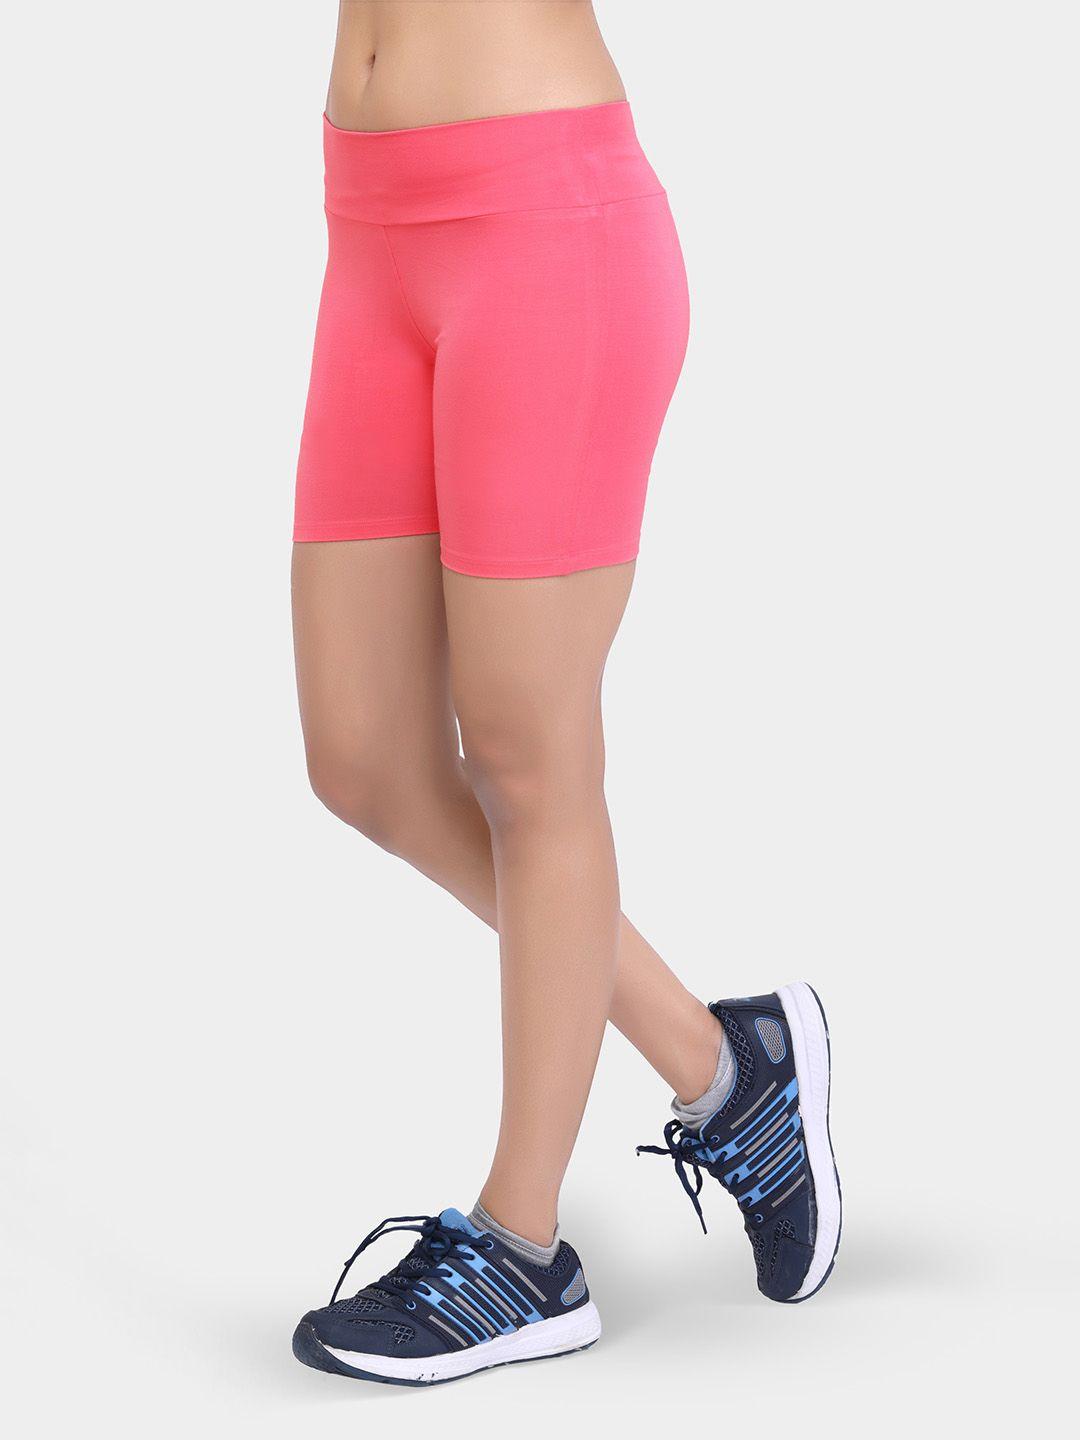 laasa sports women pink skinny fit training or gym sports shorts